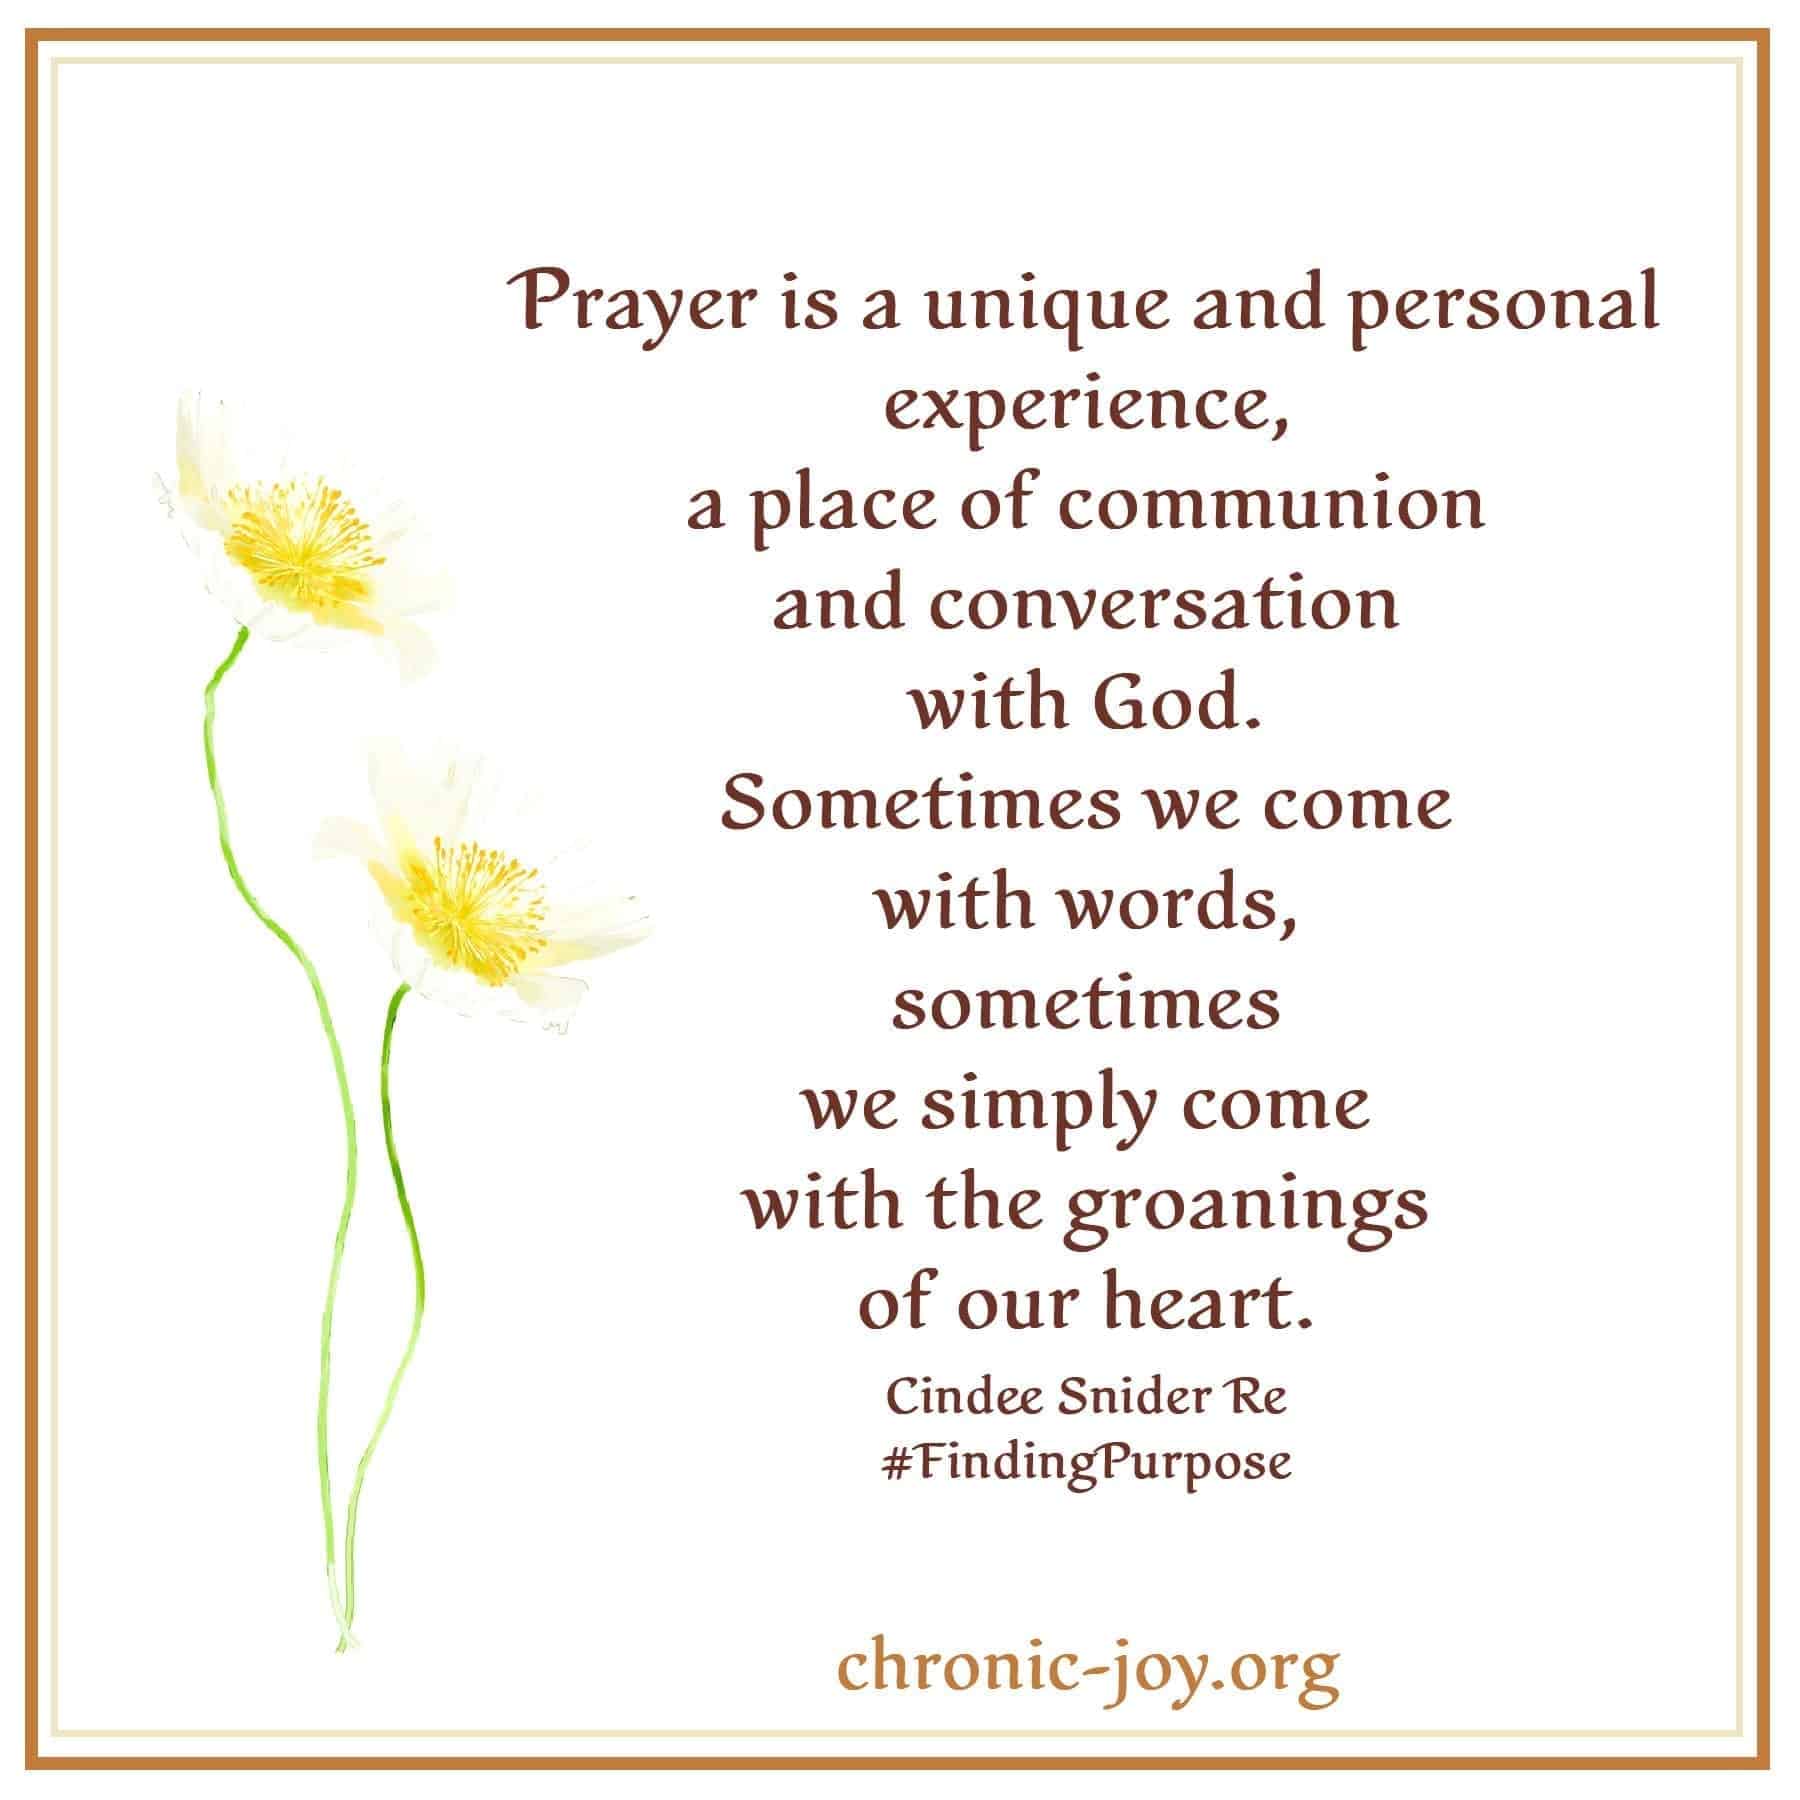 Prayer is a unique and personal experience...